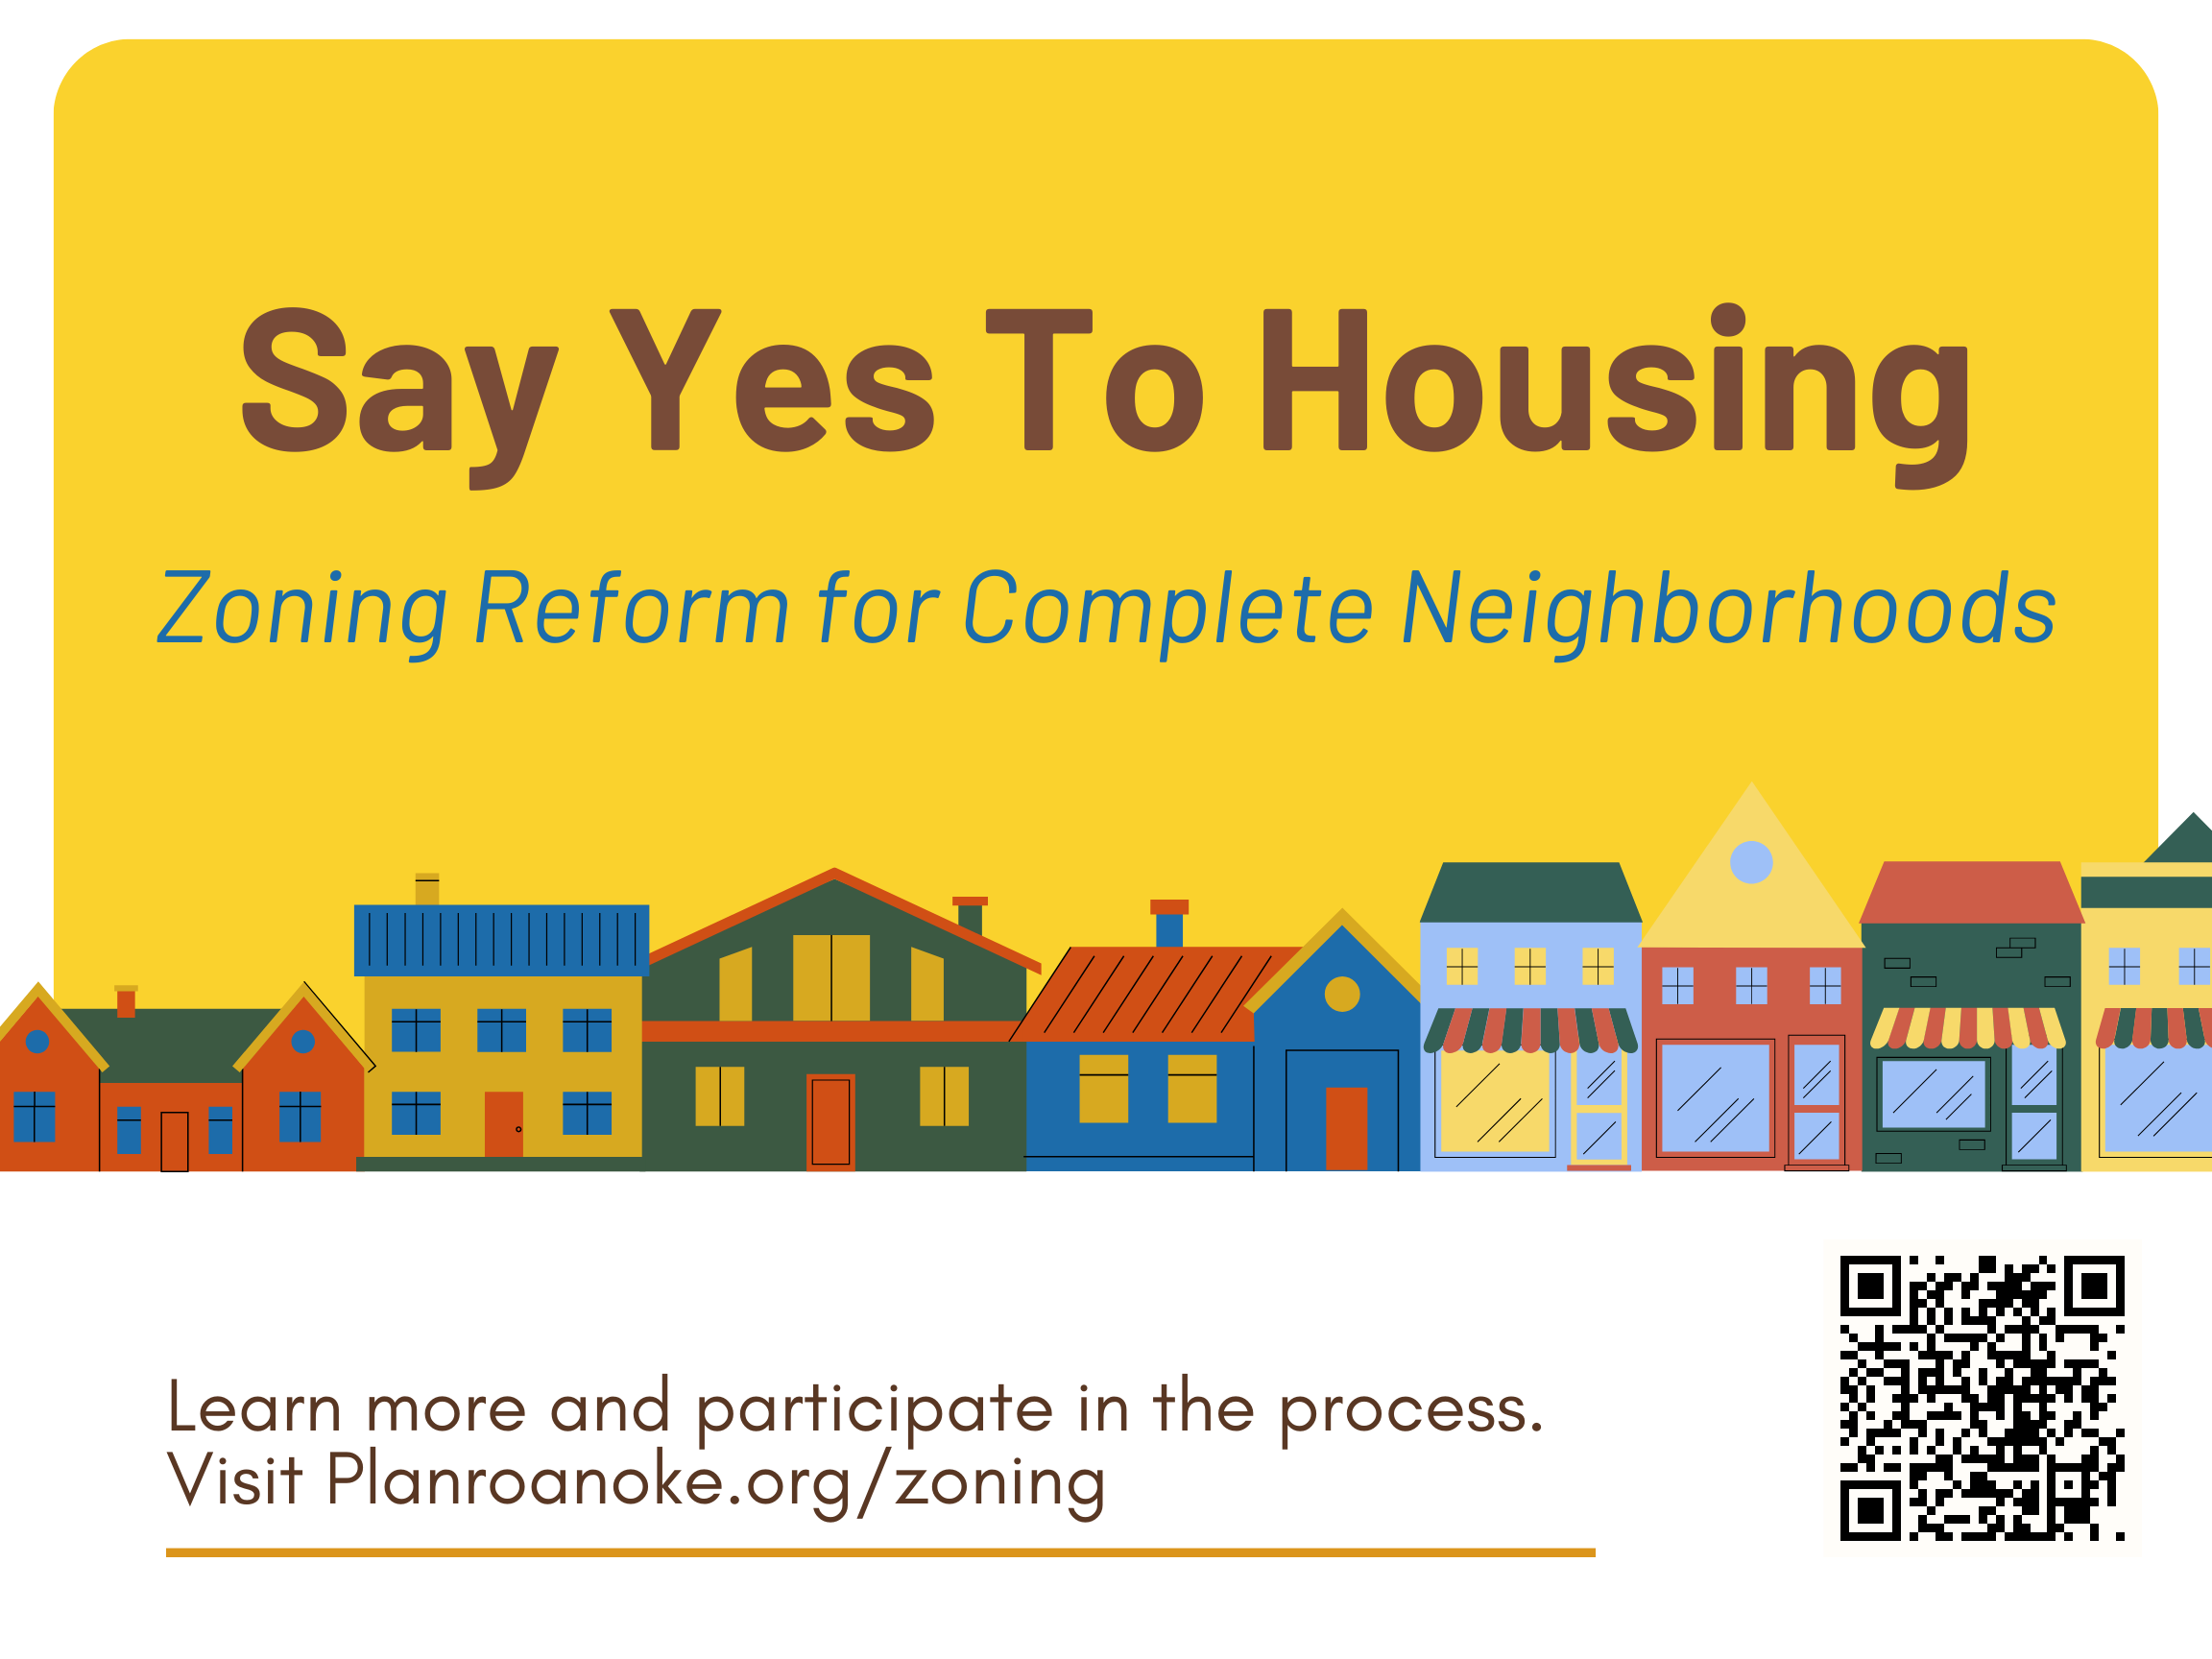 Houses with text stating "Say yes to housing". Bottom of image includes a url and qr code for planroanoke.org/zoning